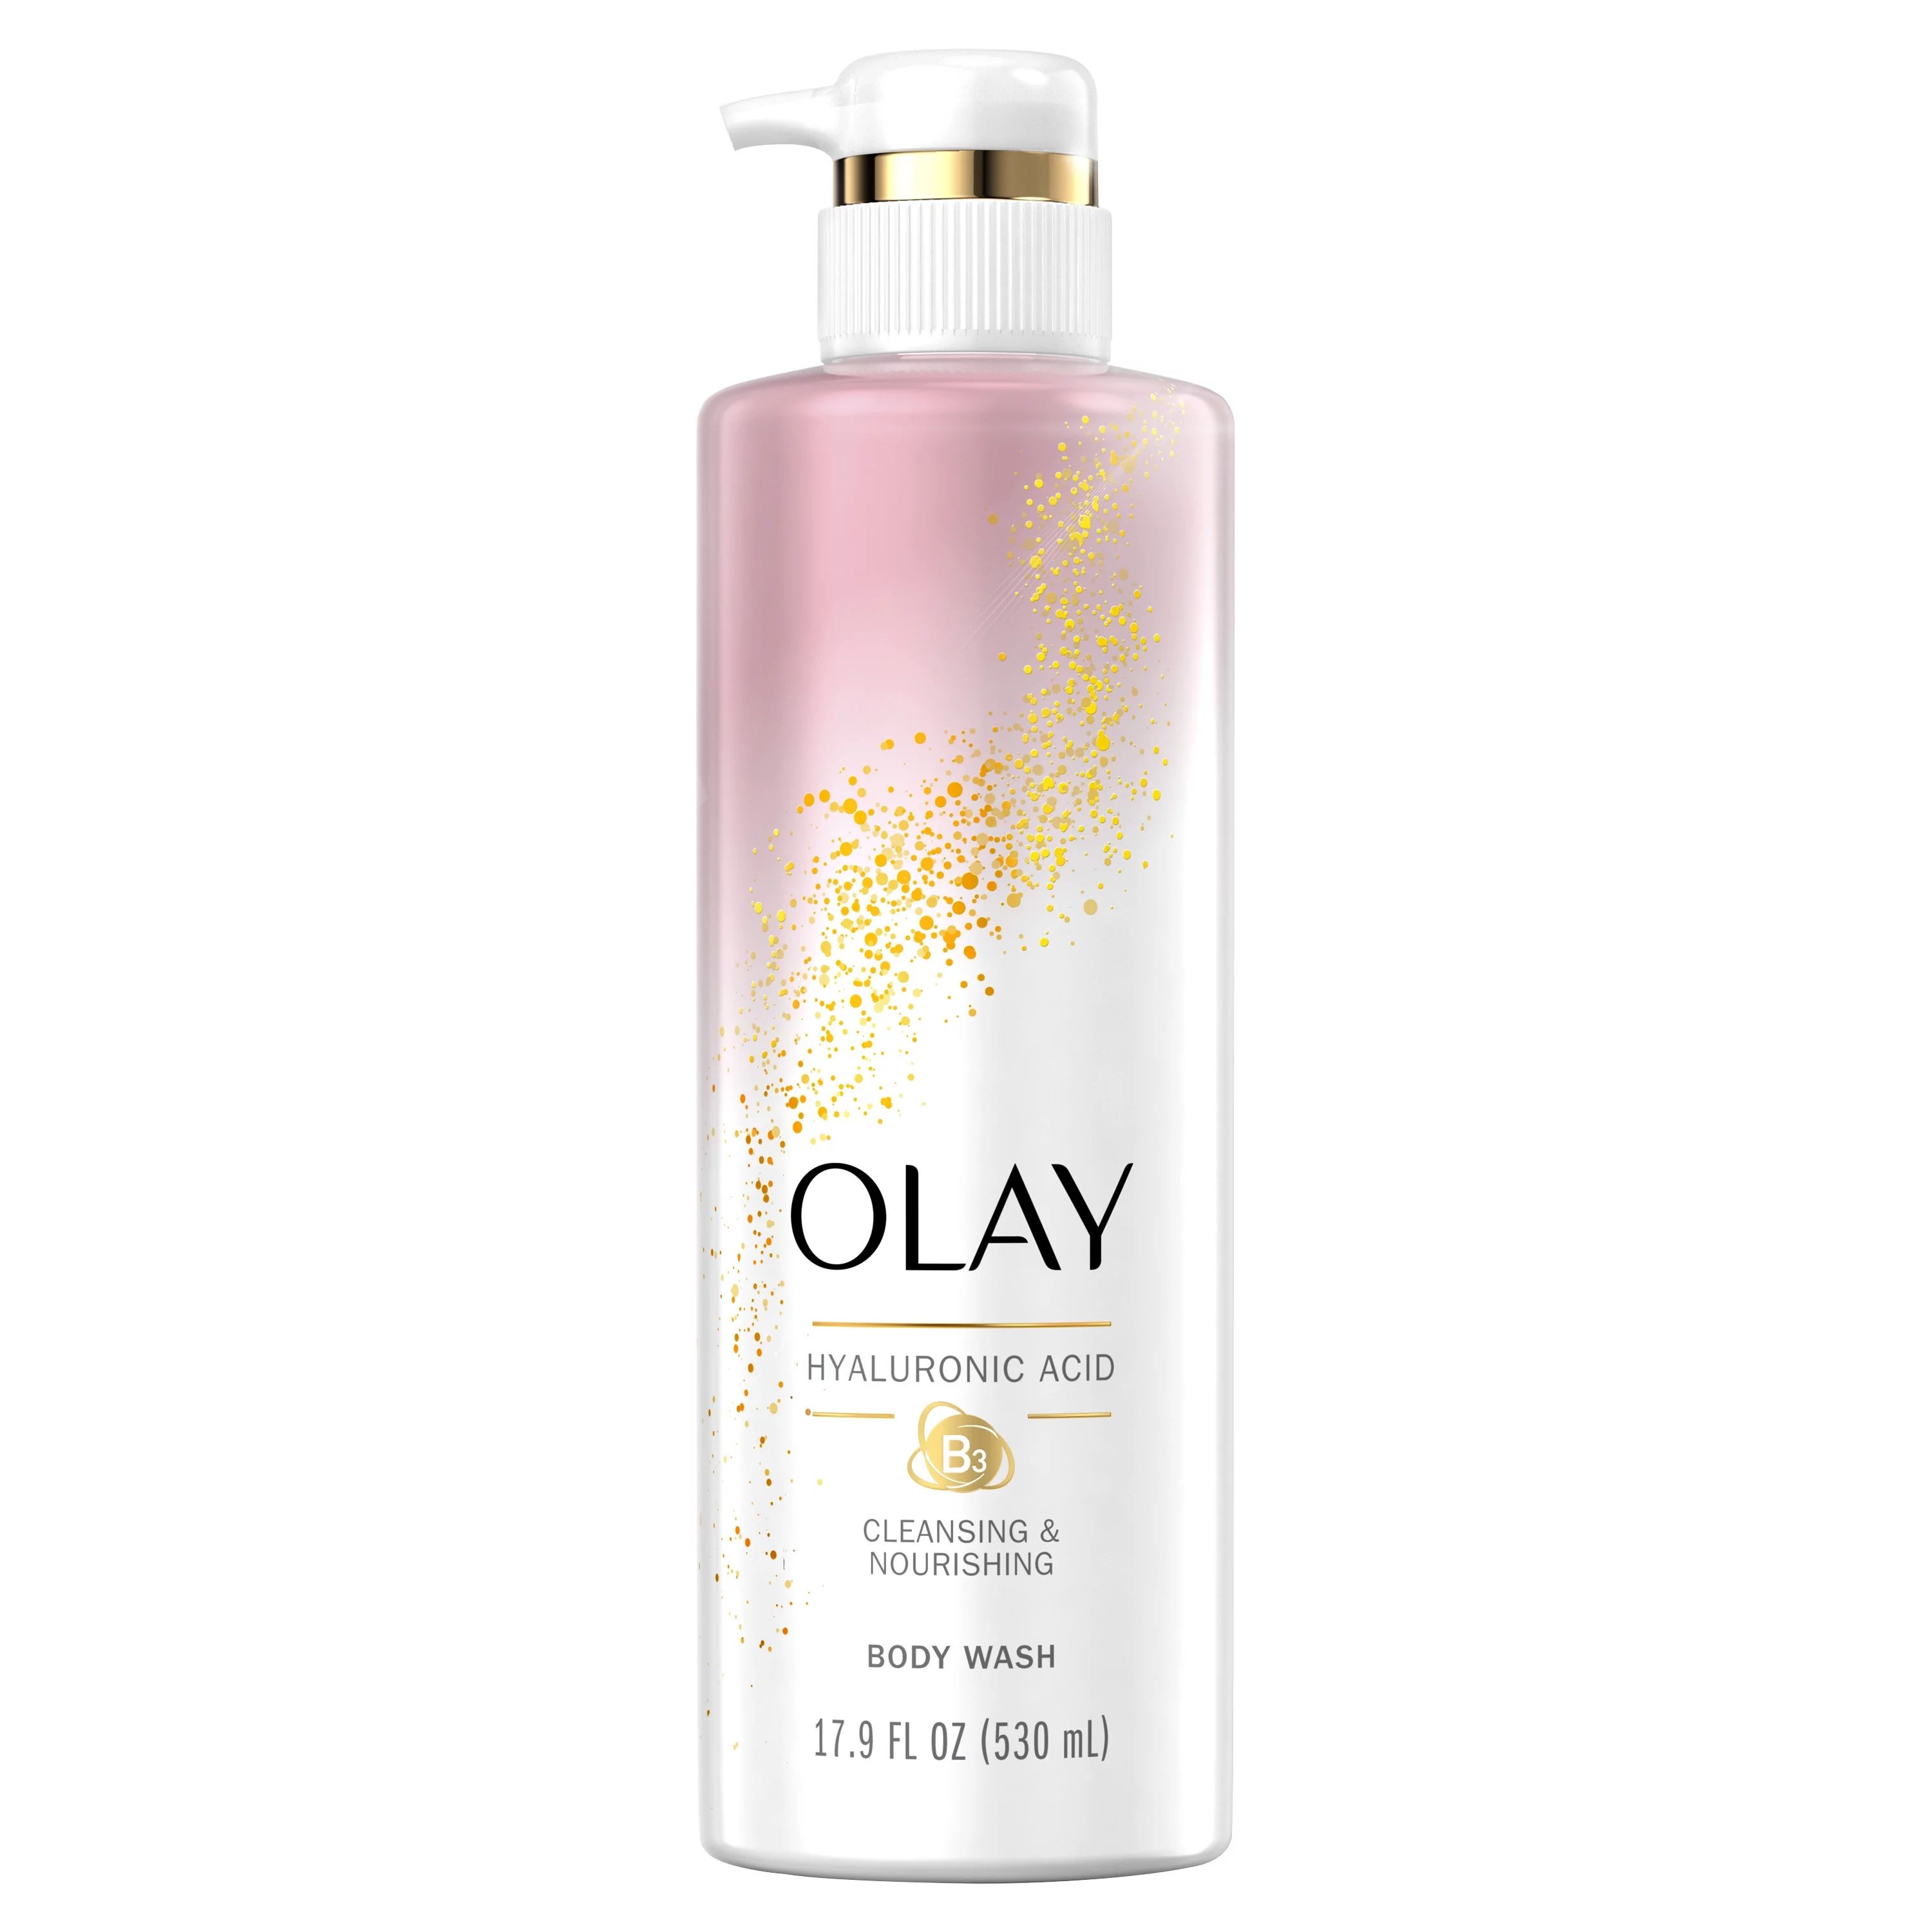 Olay Cleansing & Nourishing Body Wash with Vitamin B3 and Hyaluronic Acid, 17.9 fl oz | Walmart (US)